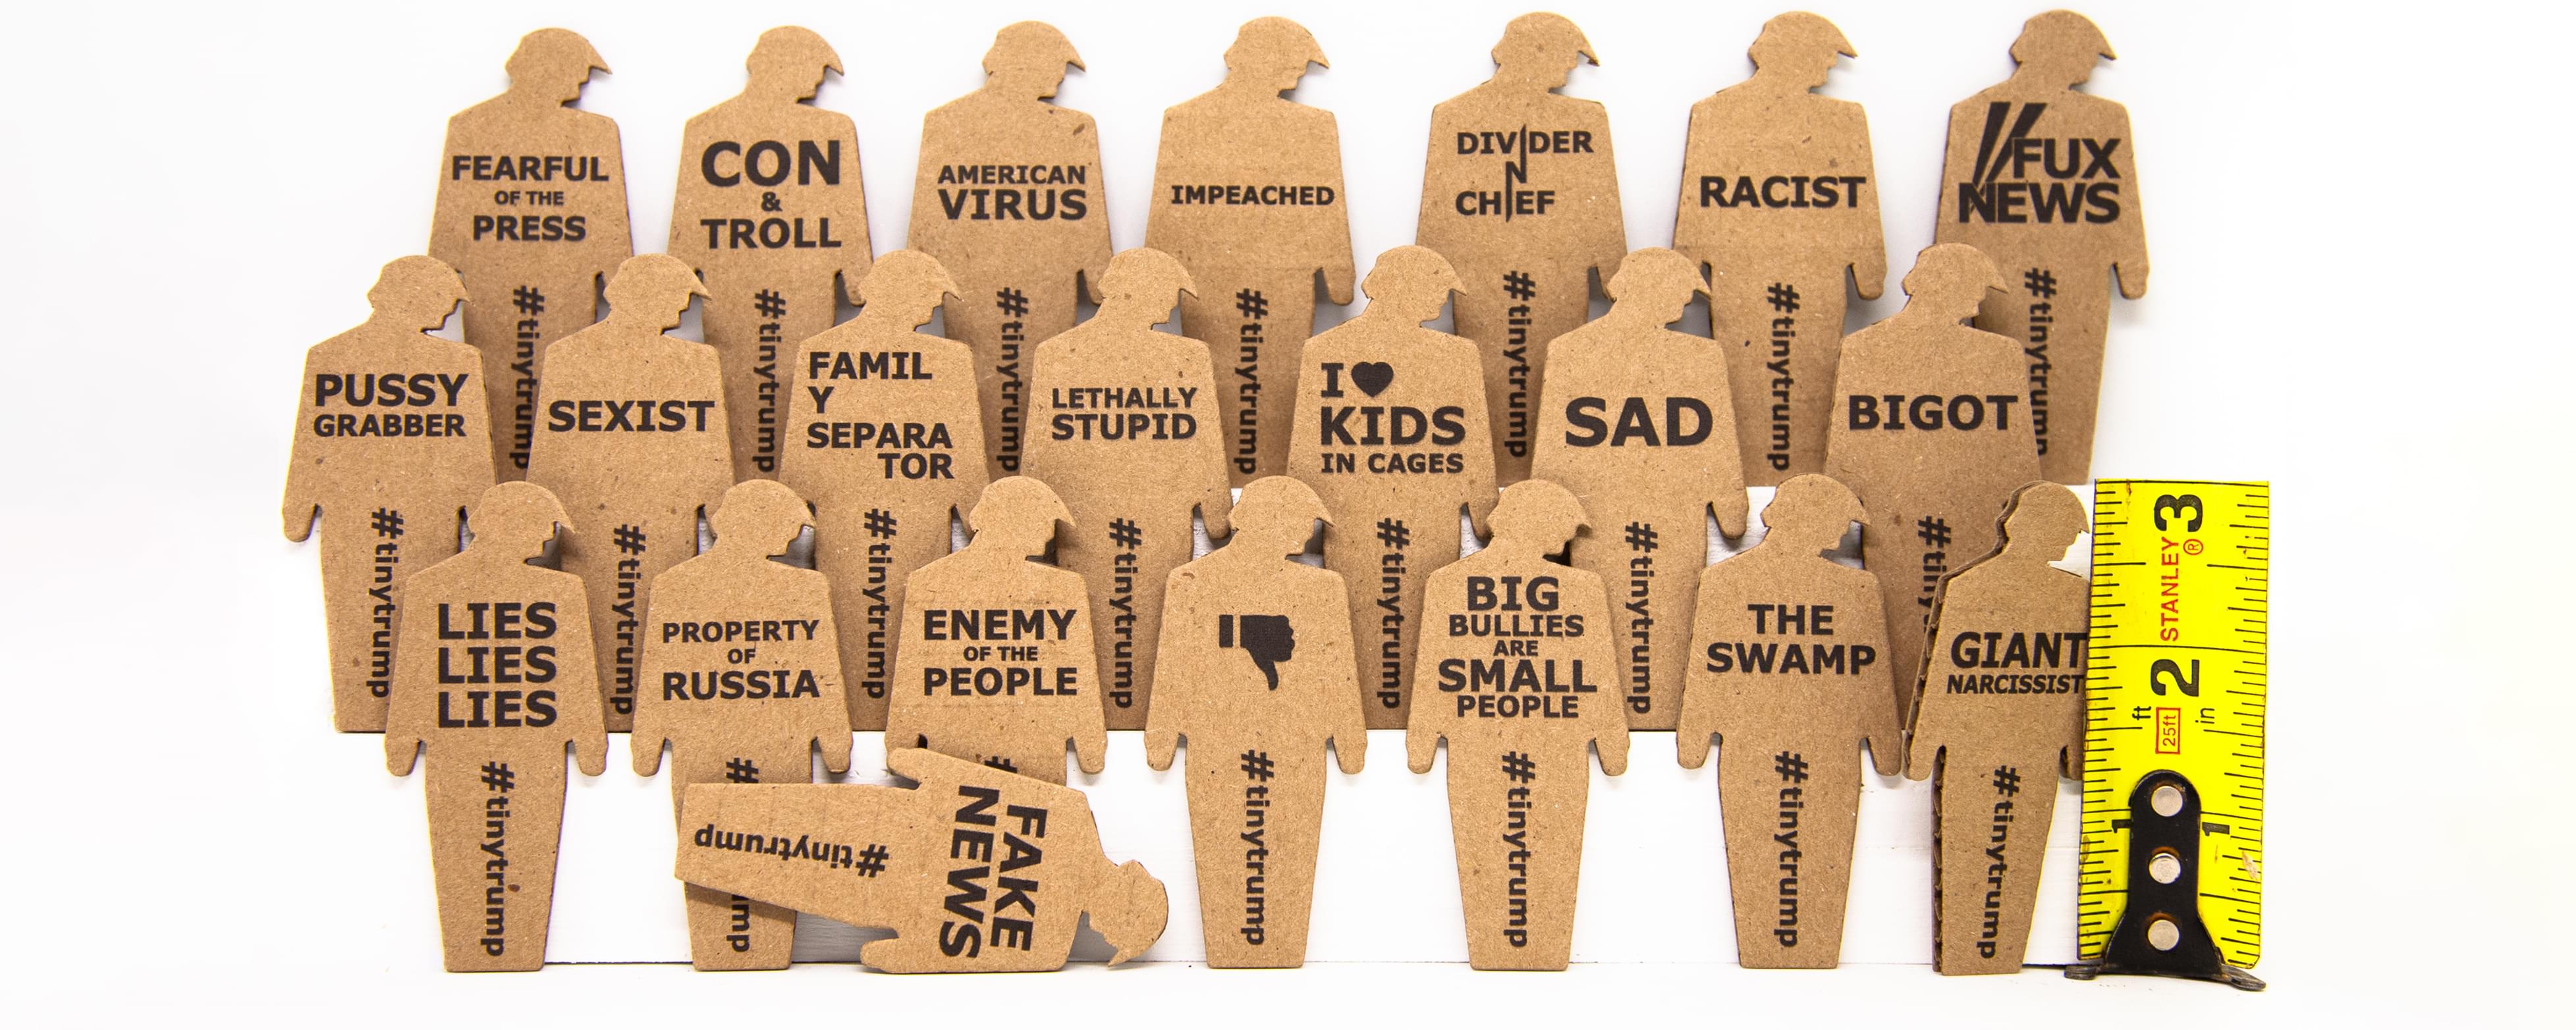 tiny trumps are three inch tall cardboard cutouts of President trump with protest slogans stamped on the chest and '#tinytrump' running down the middle of the figure's legs. Shown on the right is a yellow ruler with a tiny trump leaning against it, indicating the tiny trump is three inches tall.